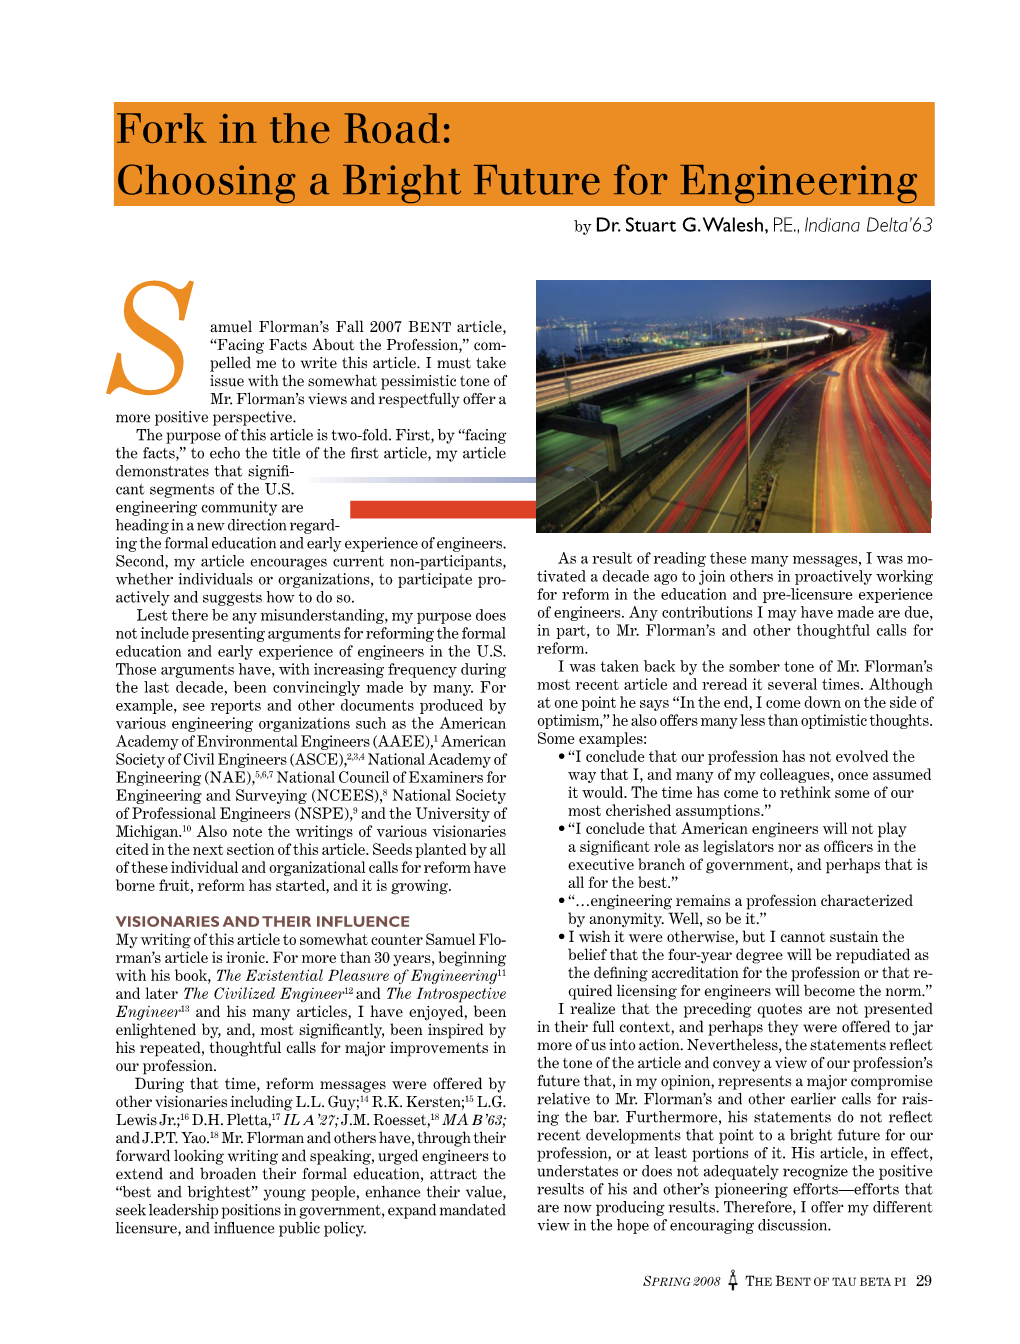 Fork in the Road: Choosing a Bright Future for Engineering by Dr